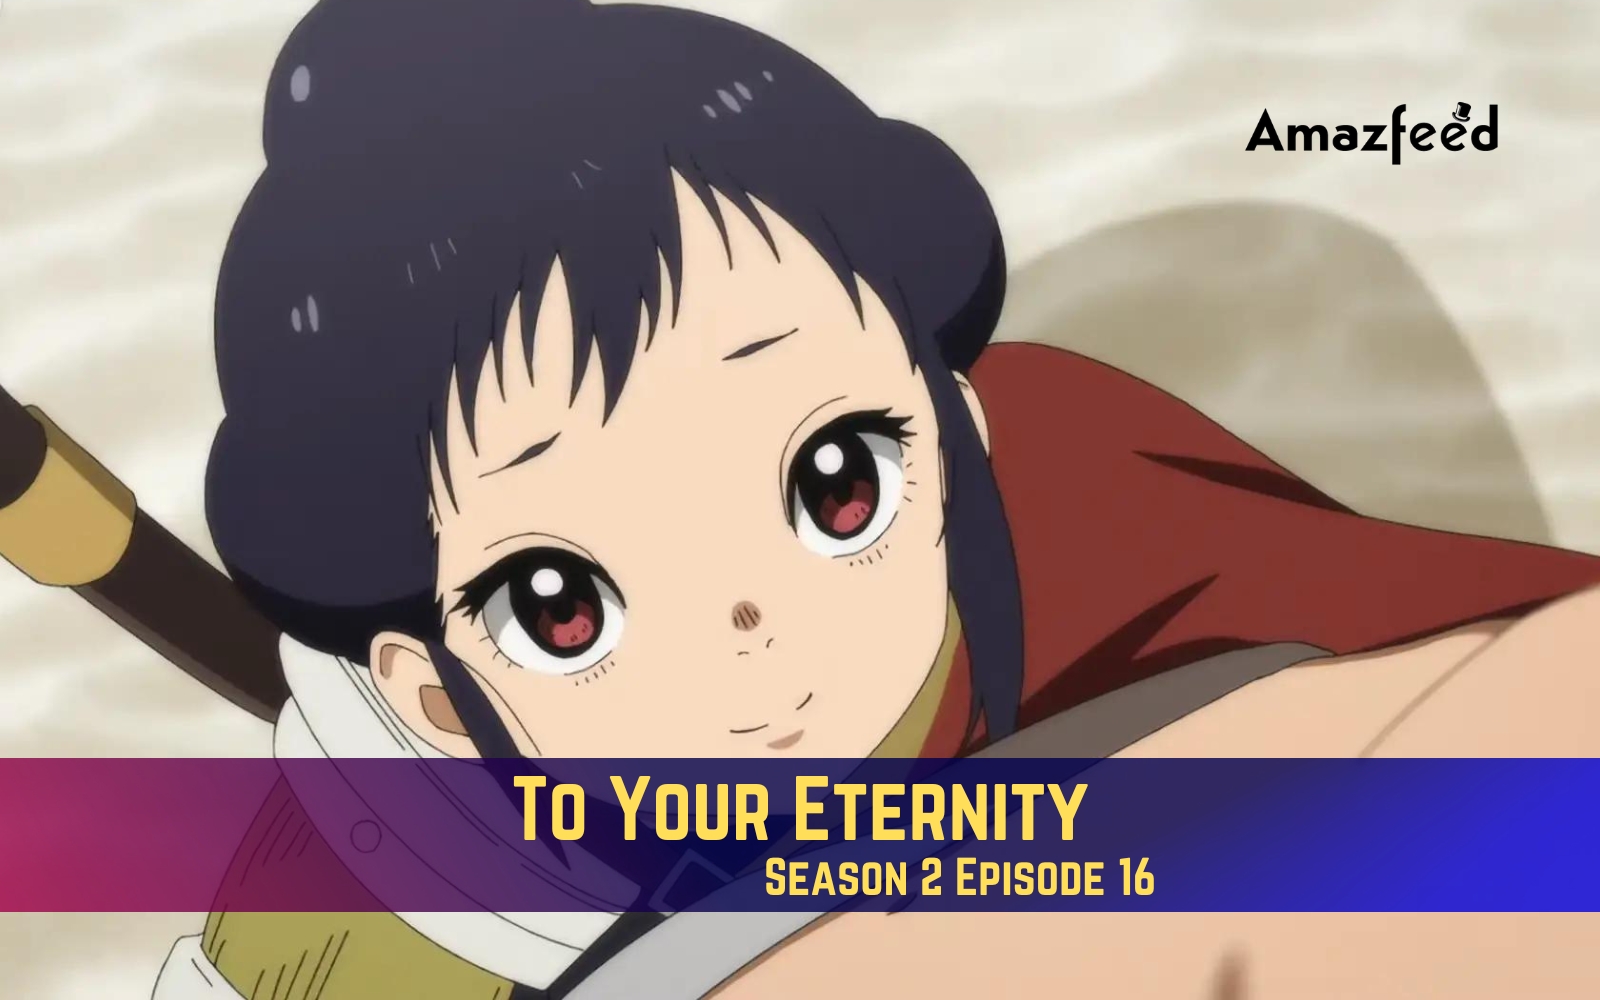 To Your Eternity Season 2 Episode 4 - Anime Series Review in 2023